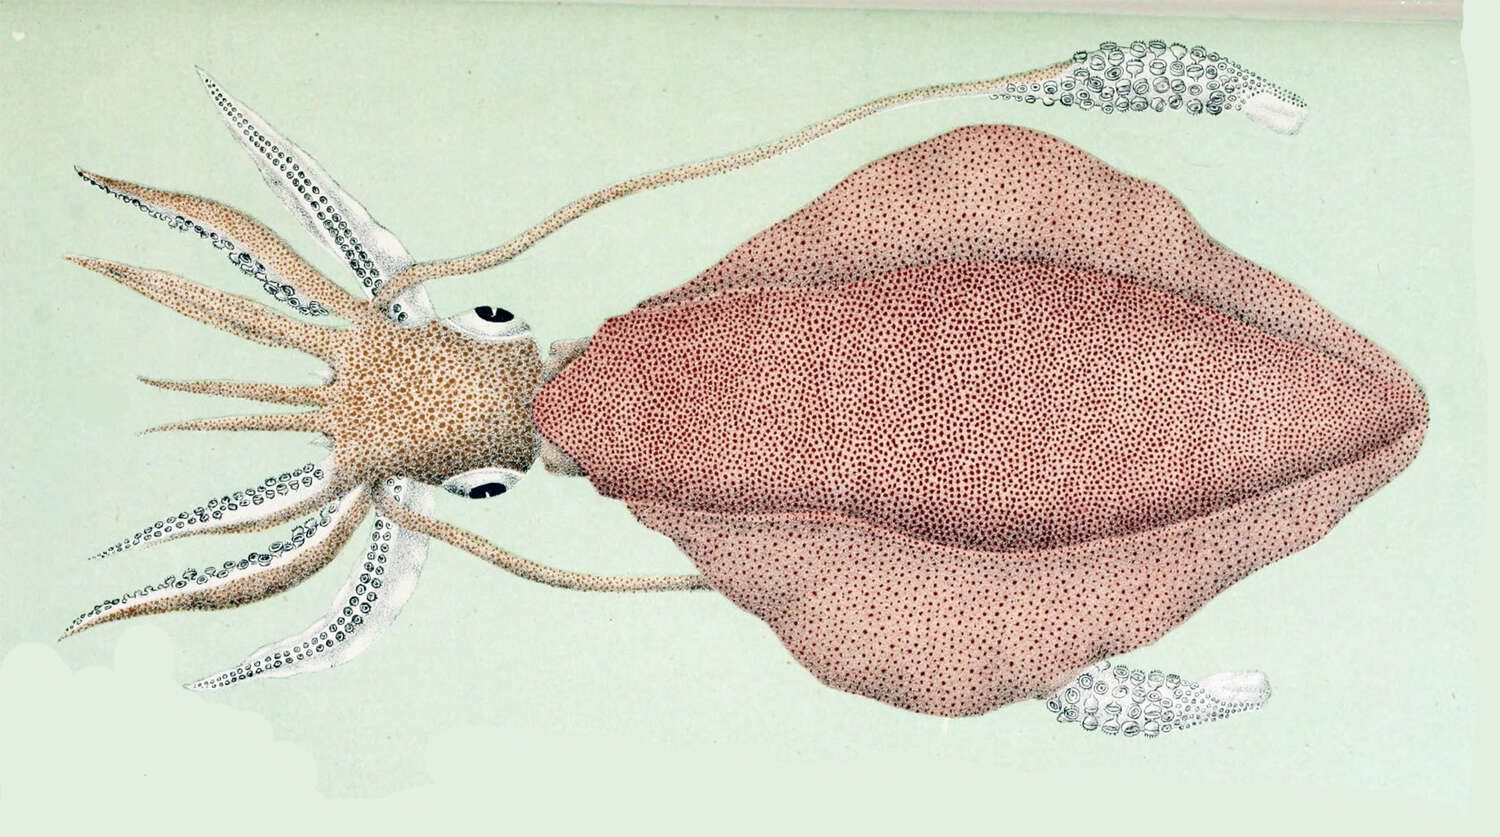 Image of Southern reef squid